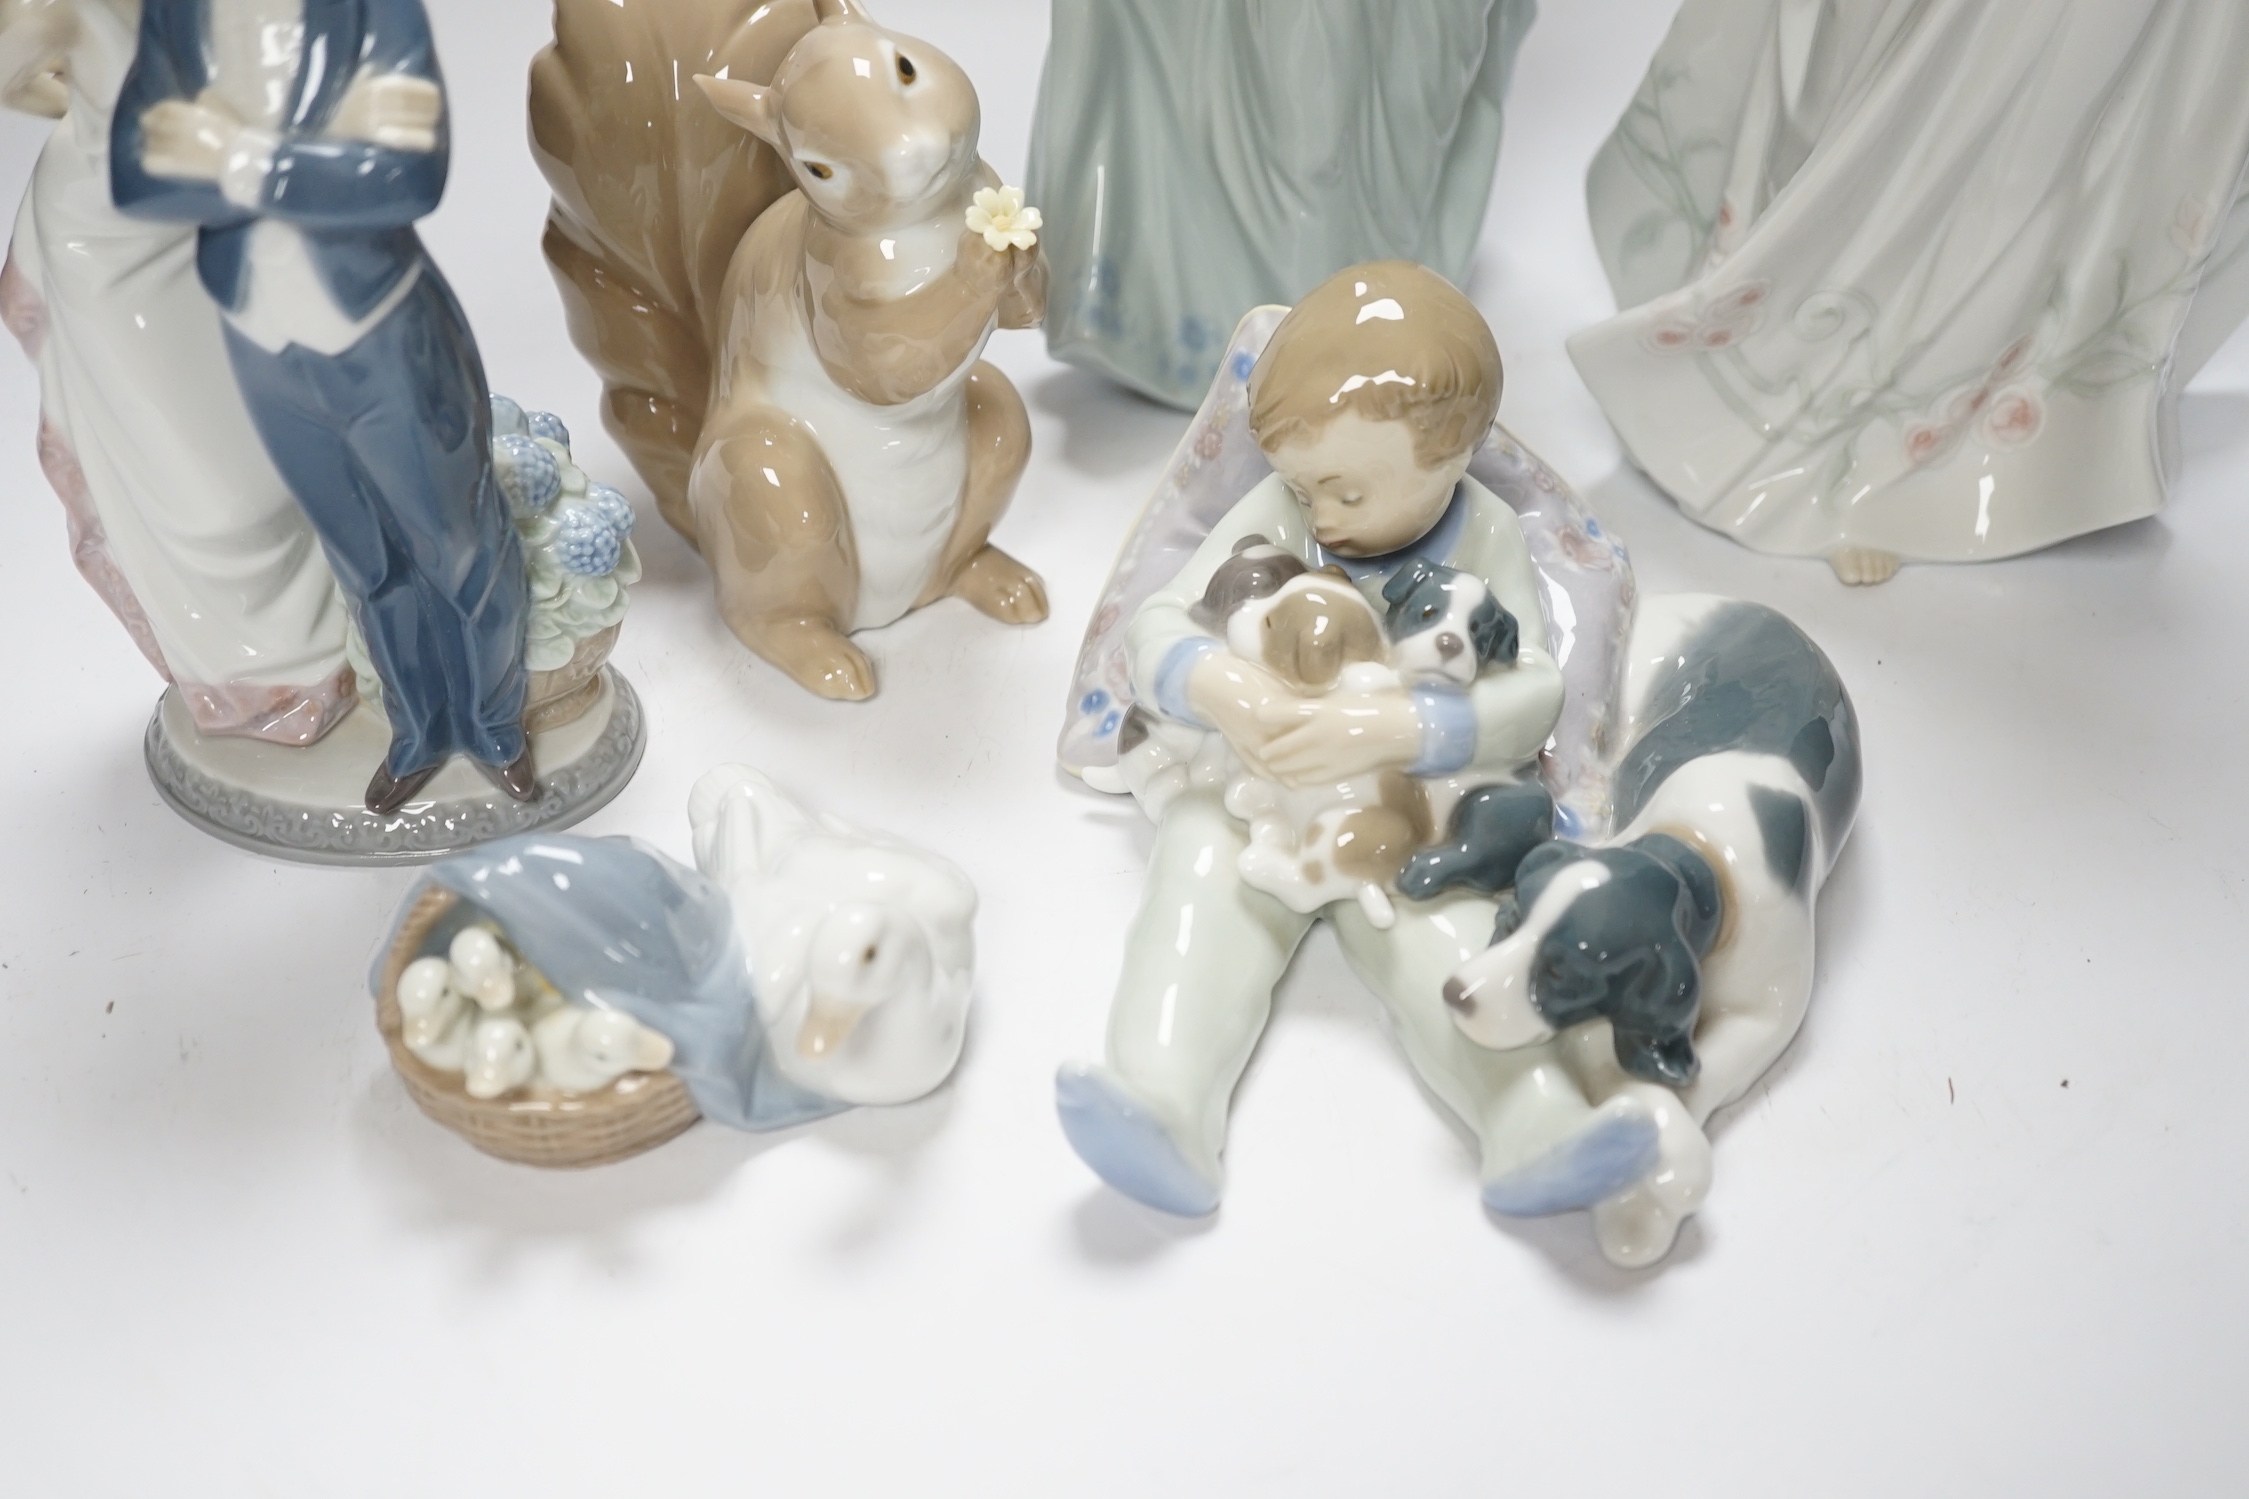 Six Lladro figure groups, Treasures of The Earth, Spring Enchantment, Sweet Dreams, Would You Be Mine, Let’s Make Up and Duckling, all boxed (6)